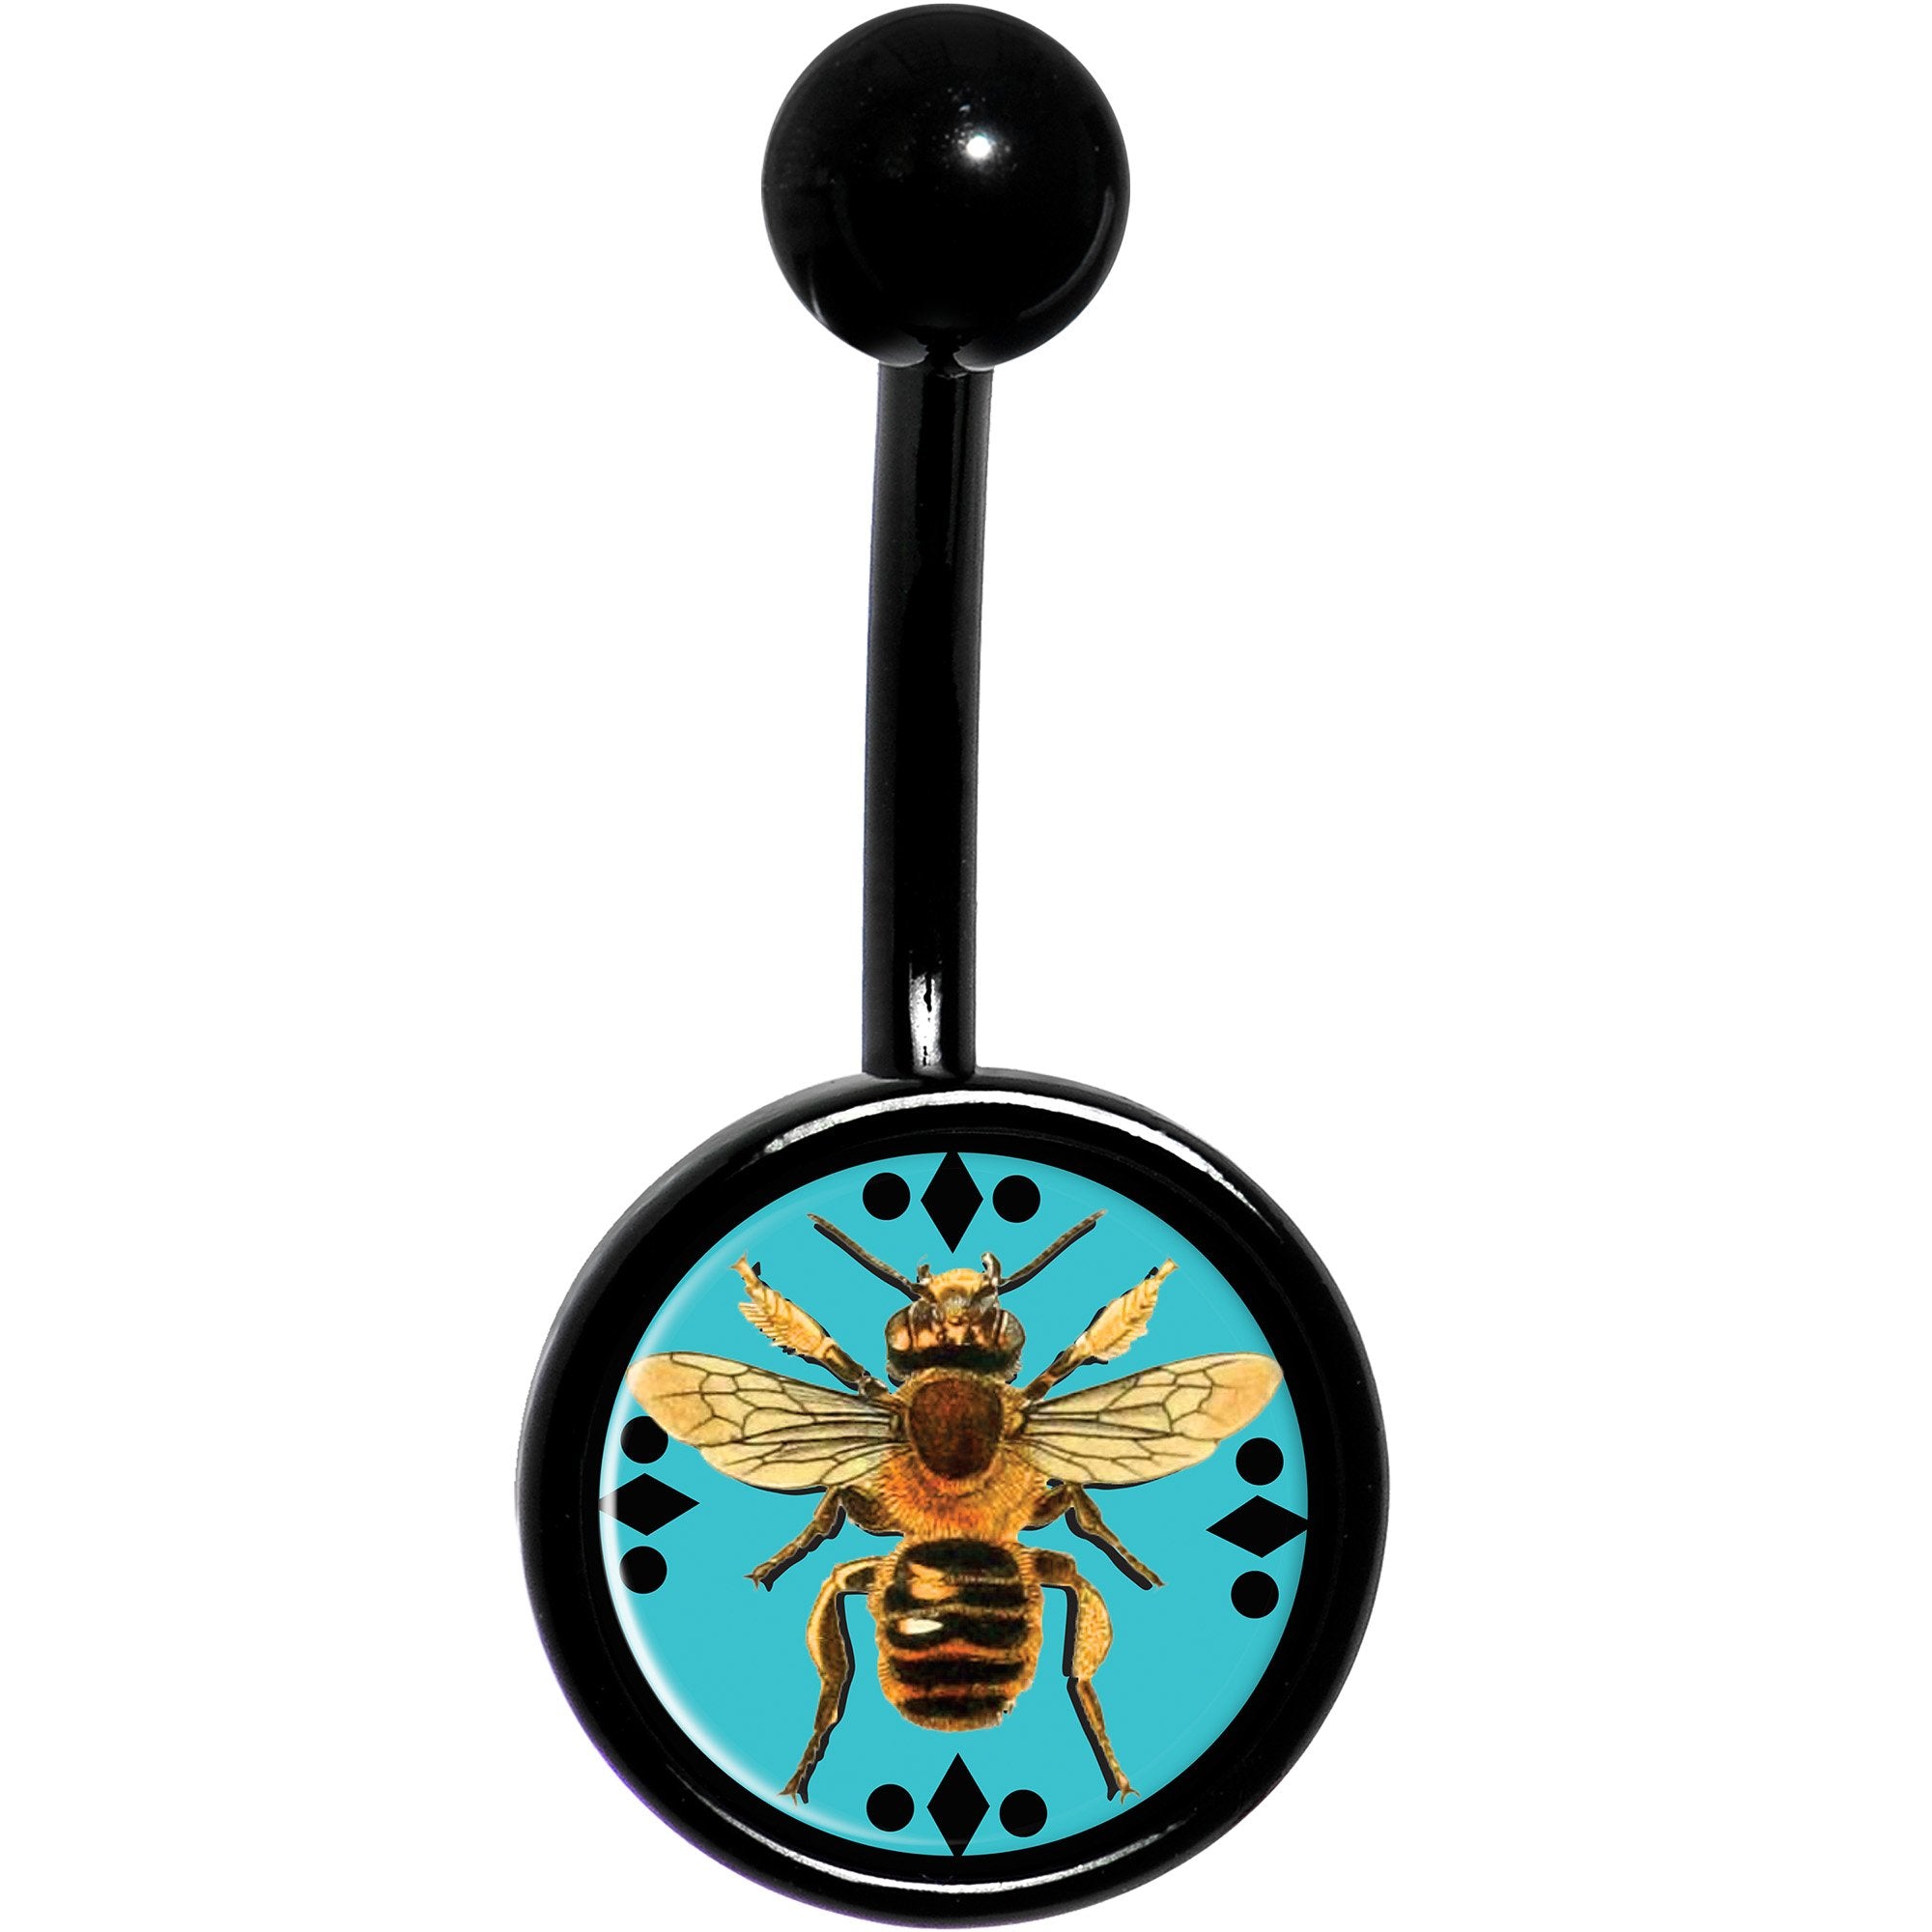 Buzzing Bumble Bee Black Belly Ring